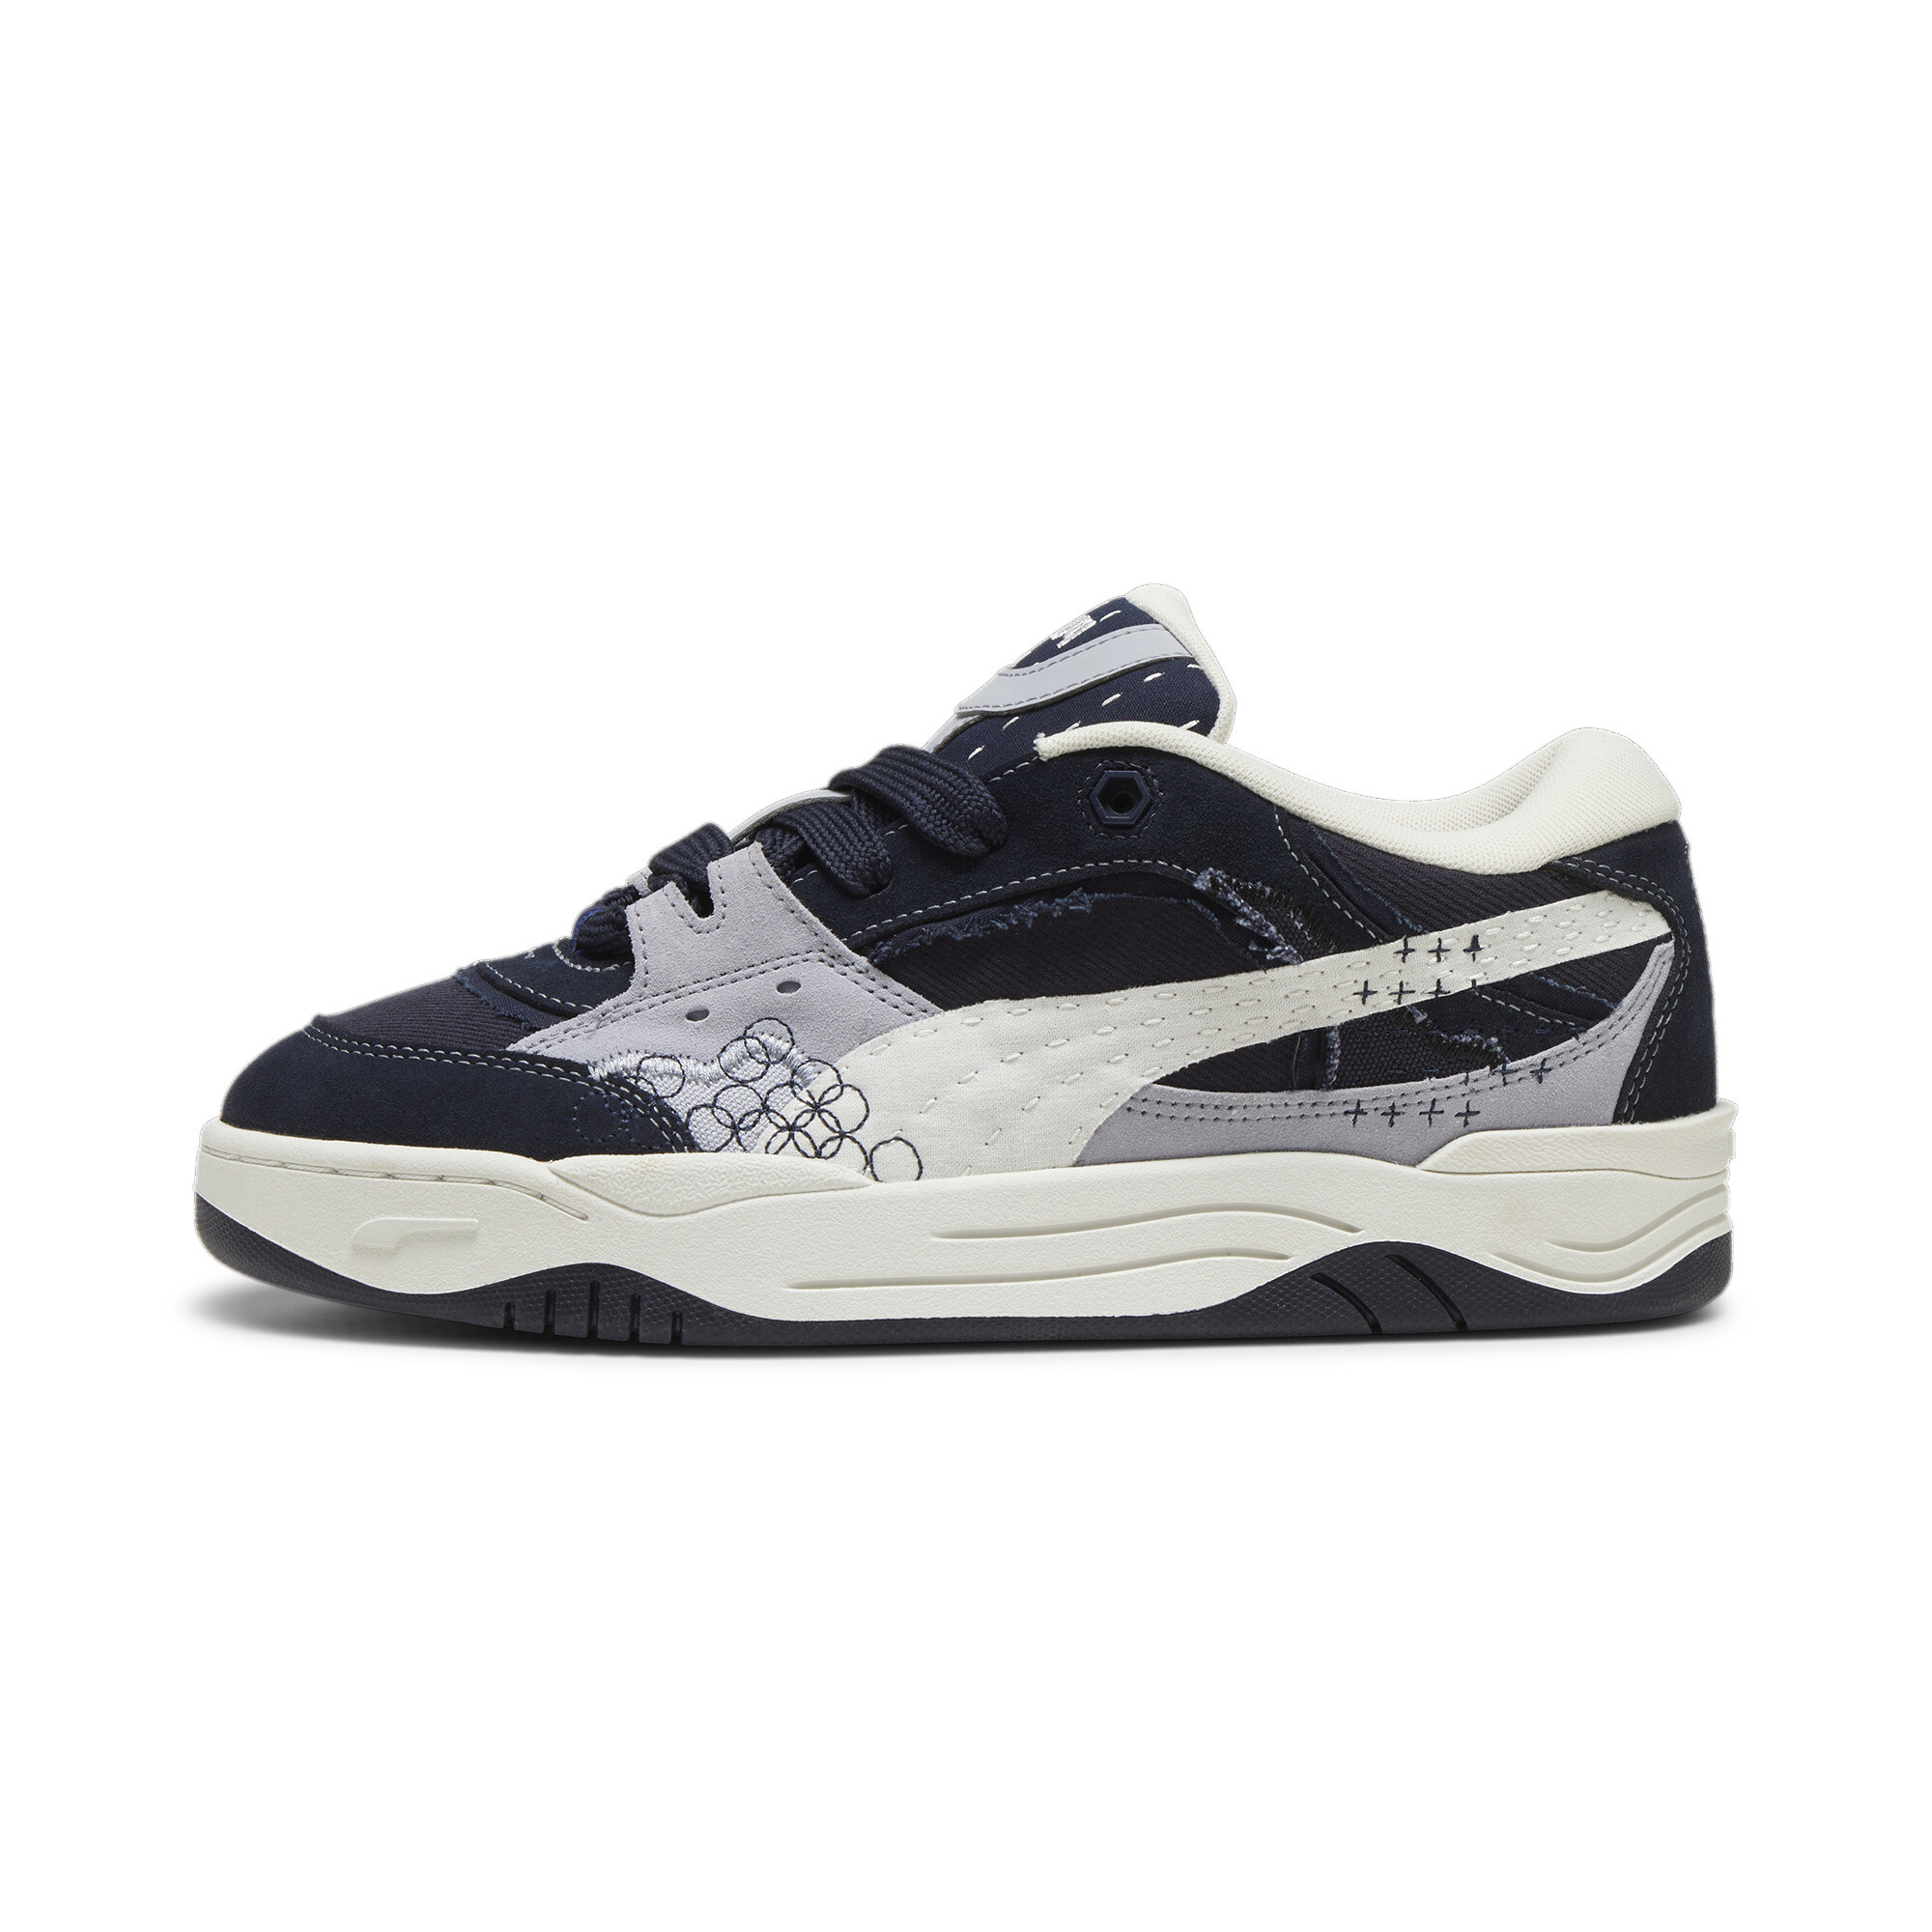 Puma-180 Skate Sneakers, Blue, Size 48, Shoes